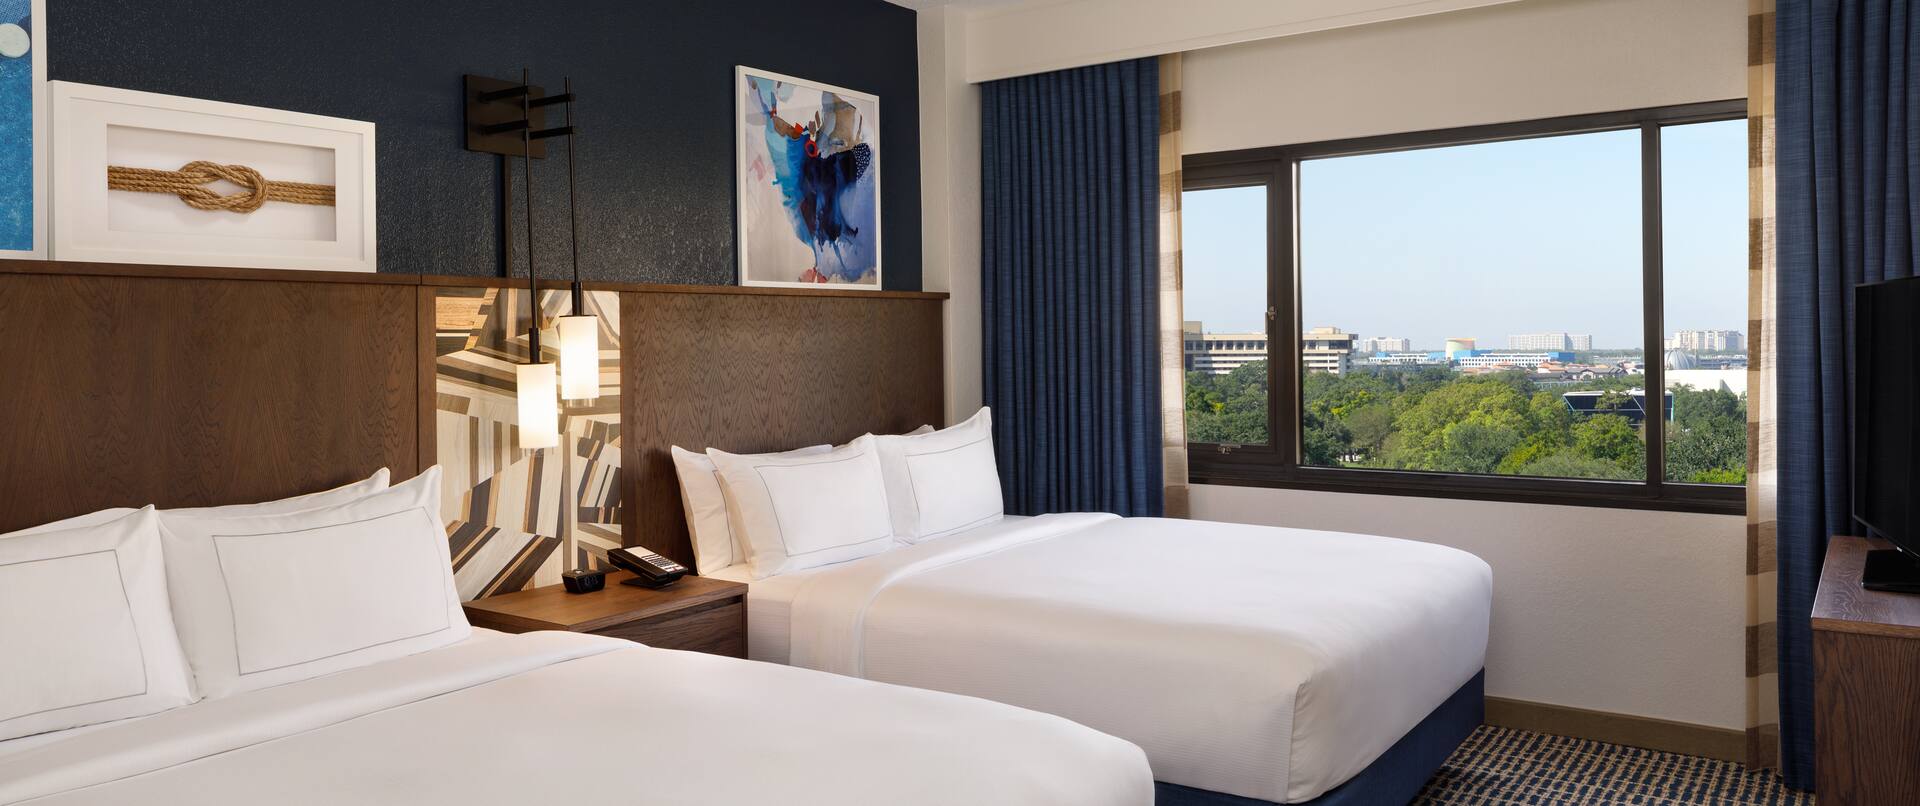 twin beds in room with view